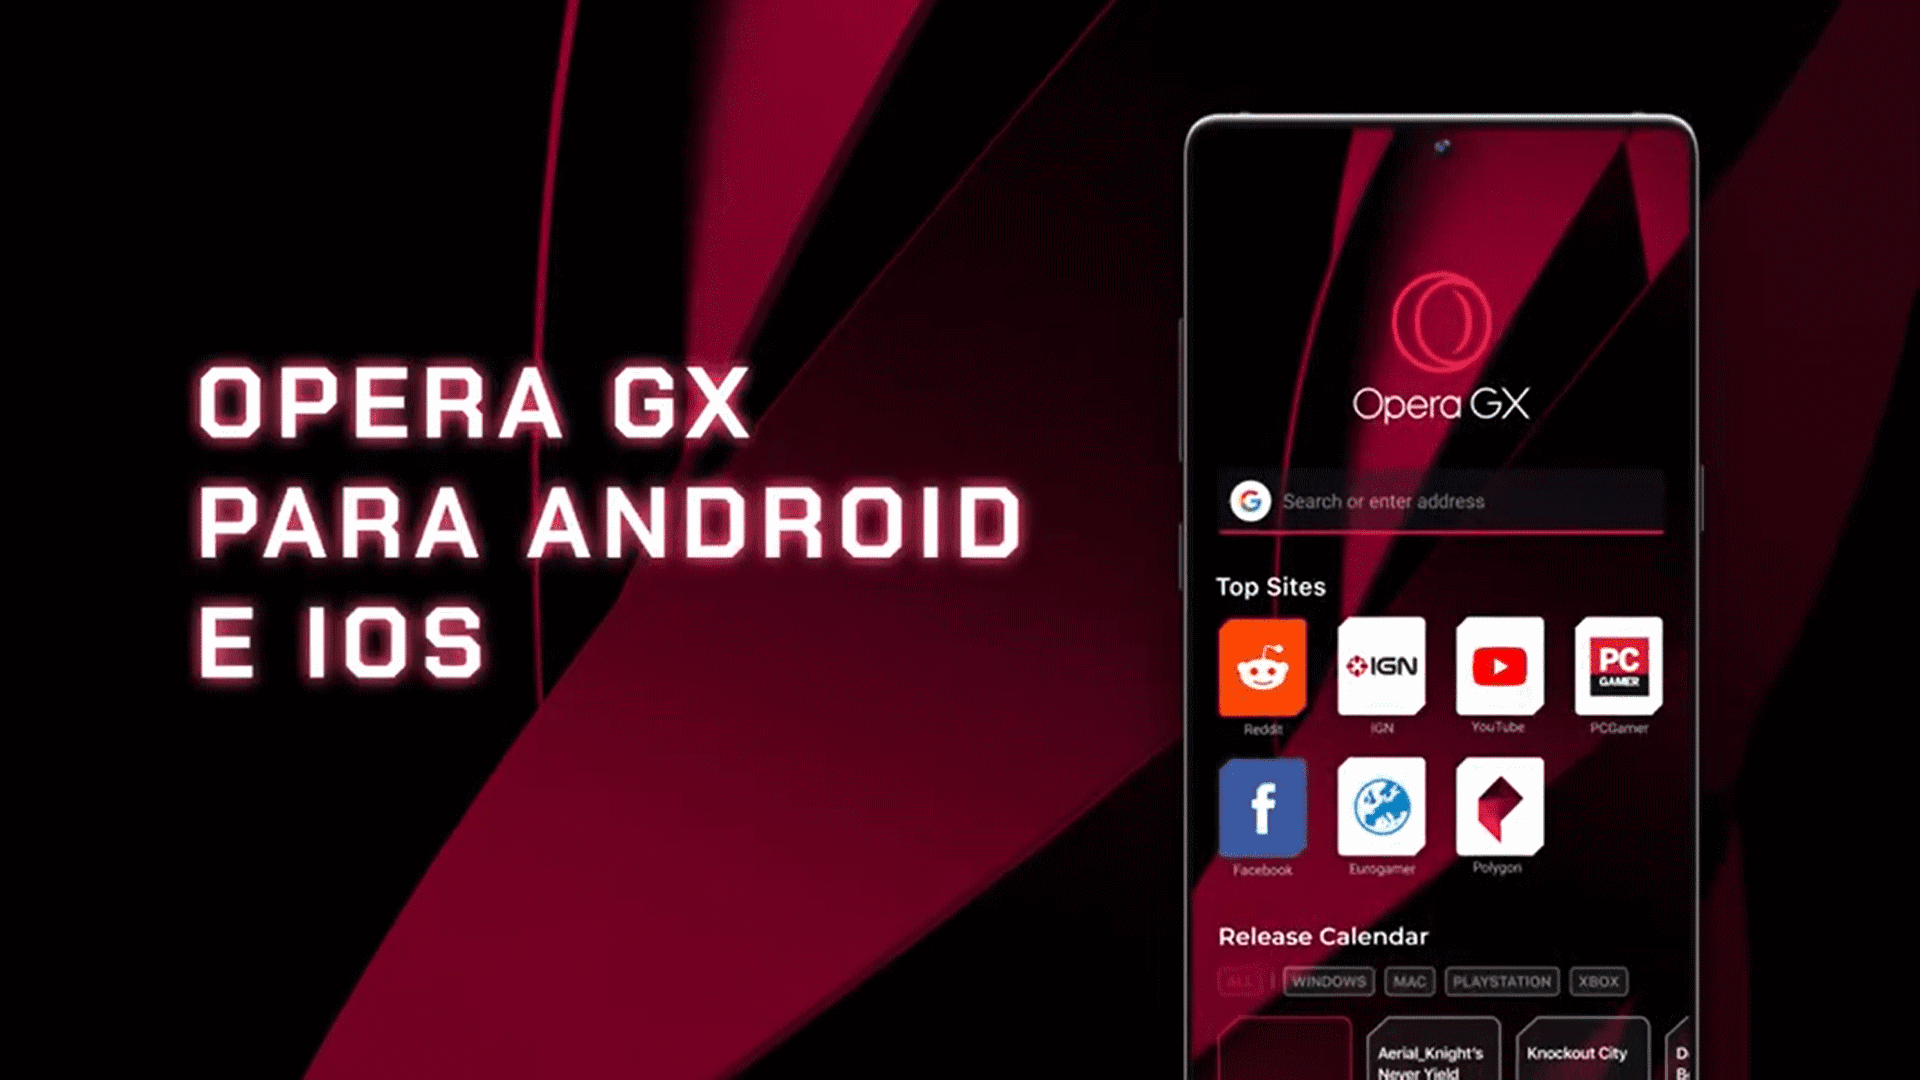 instal the new for android Opera GX 102.0.4880.82